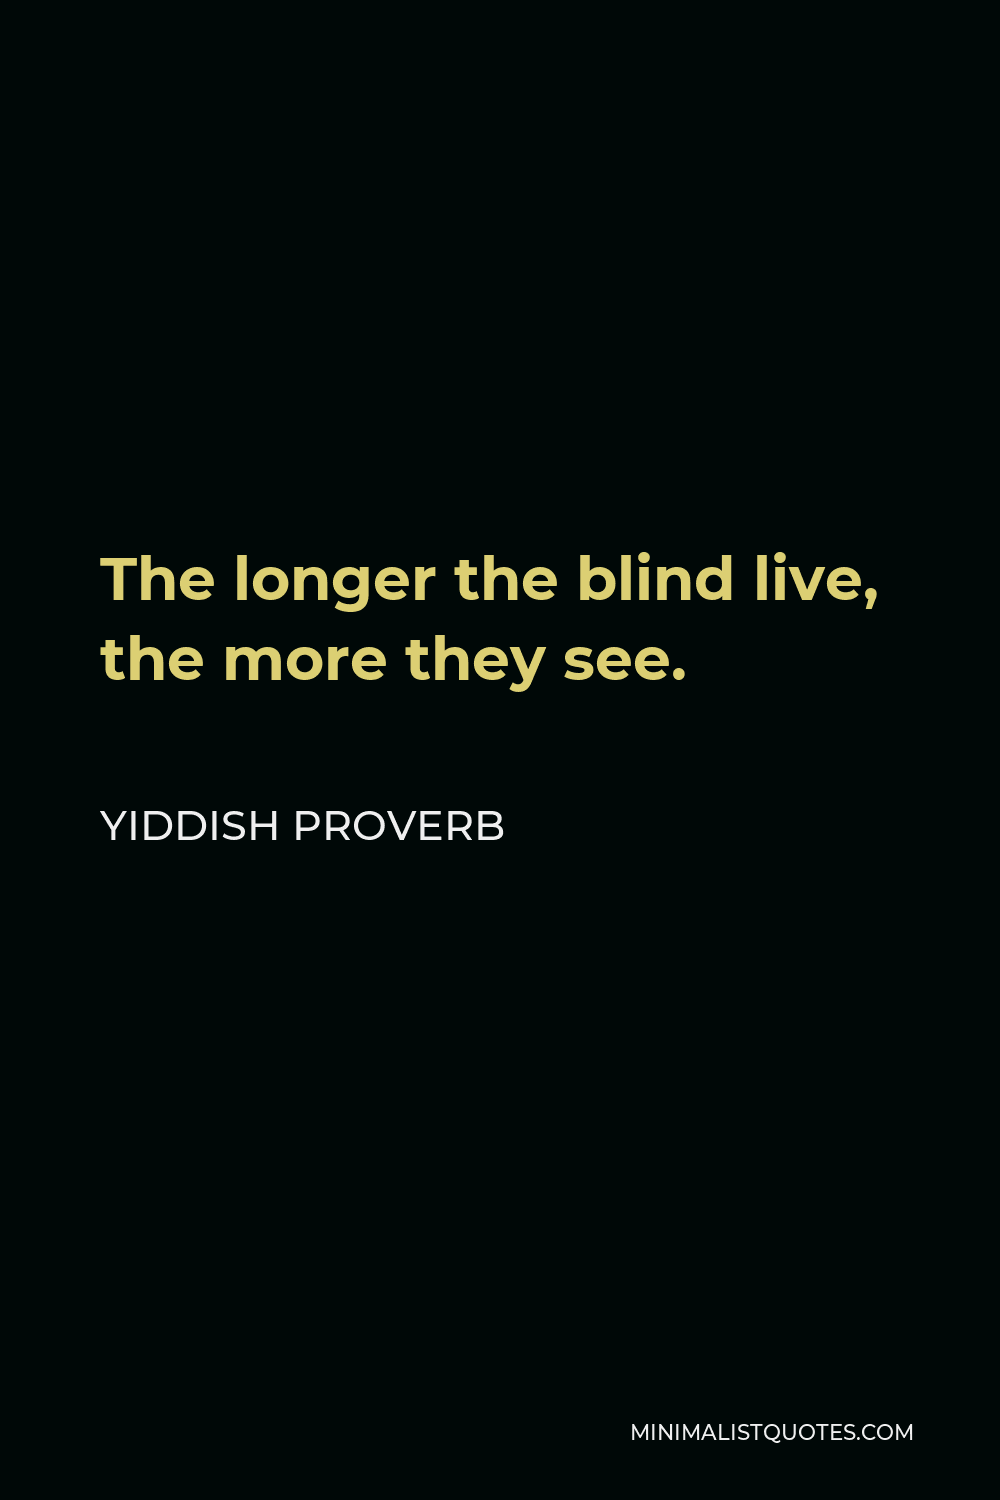 Yiddish Proverb Quote - The longer the blind live, the more they see.